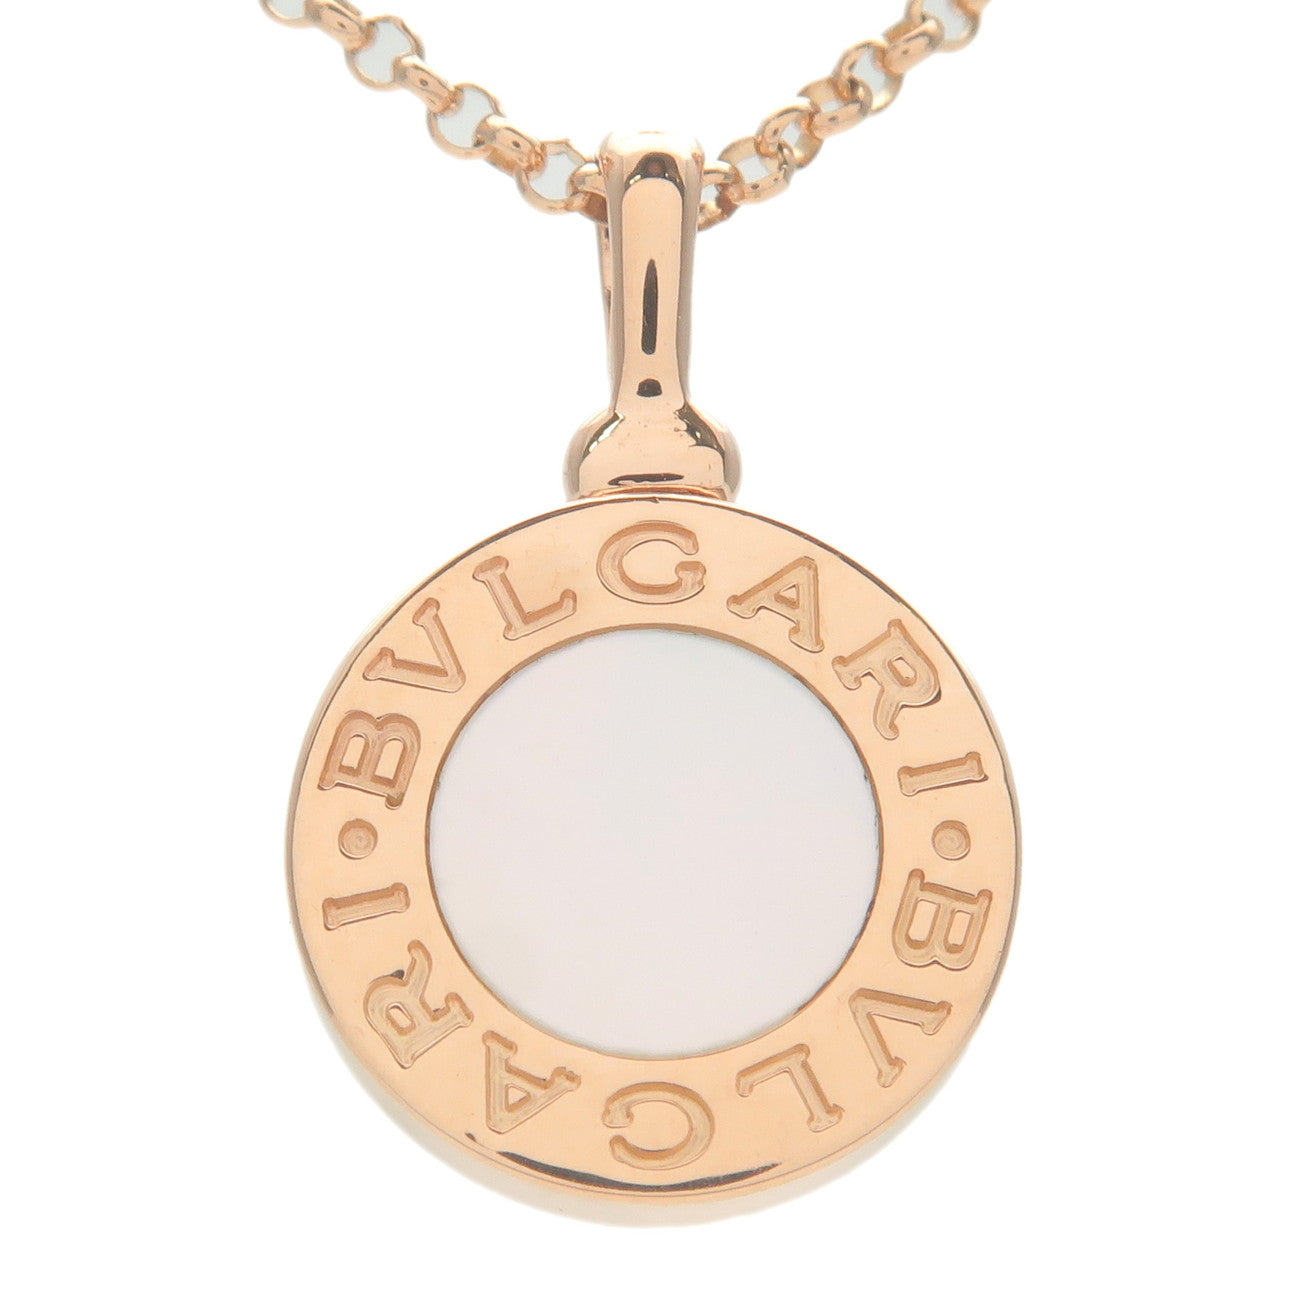 BVLGARI Necklace White Shell Necklace K18 750 Rose Gold